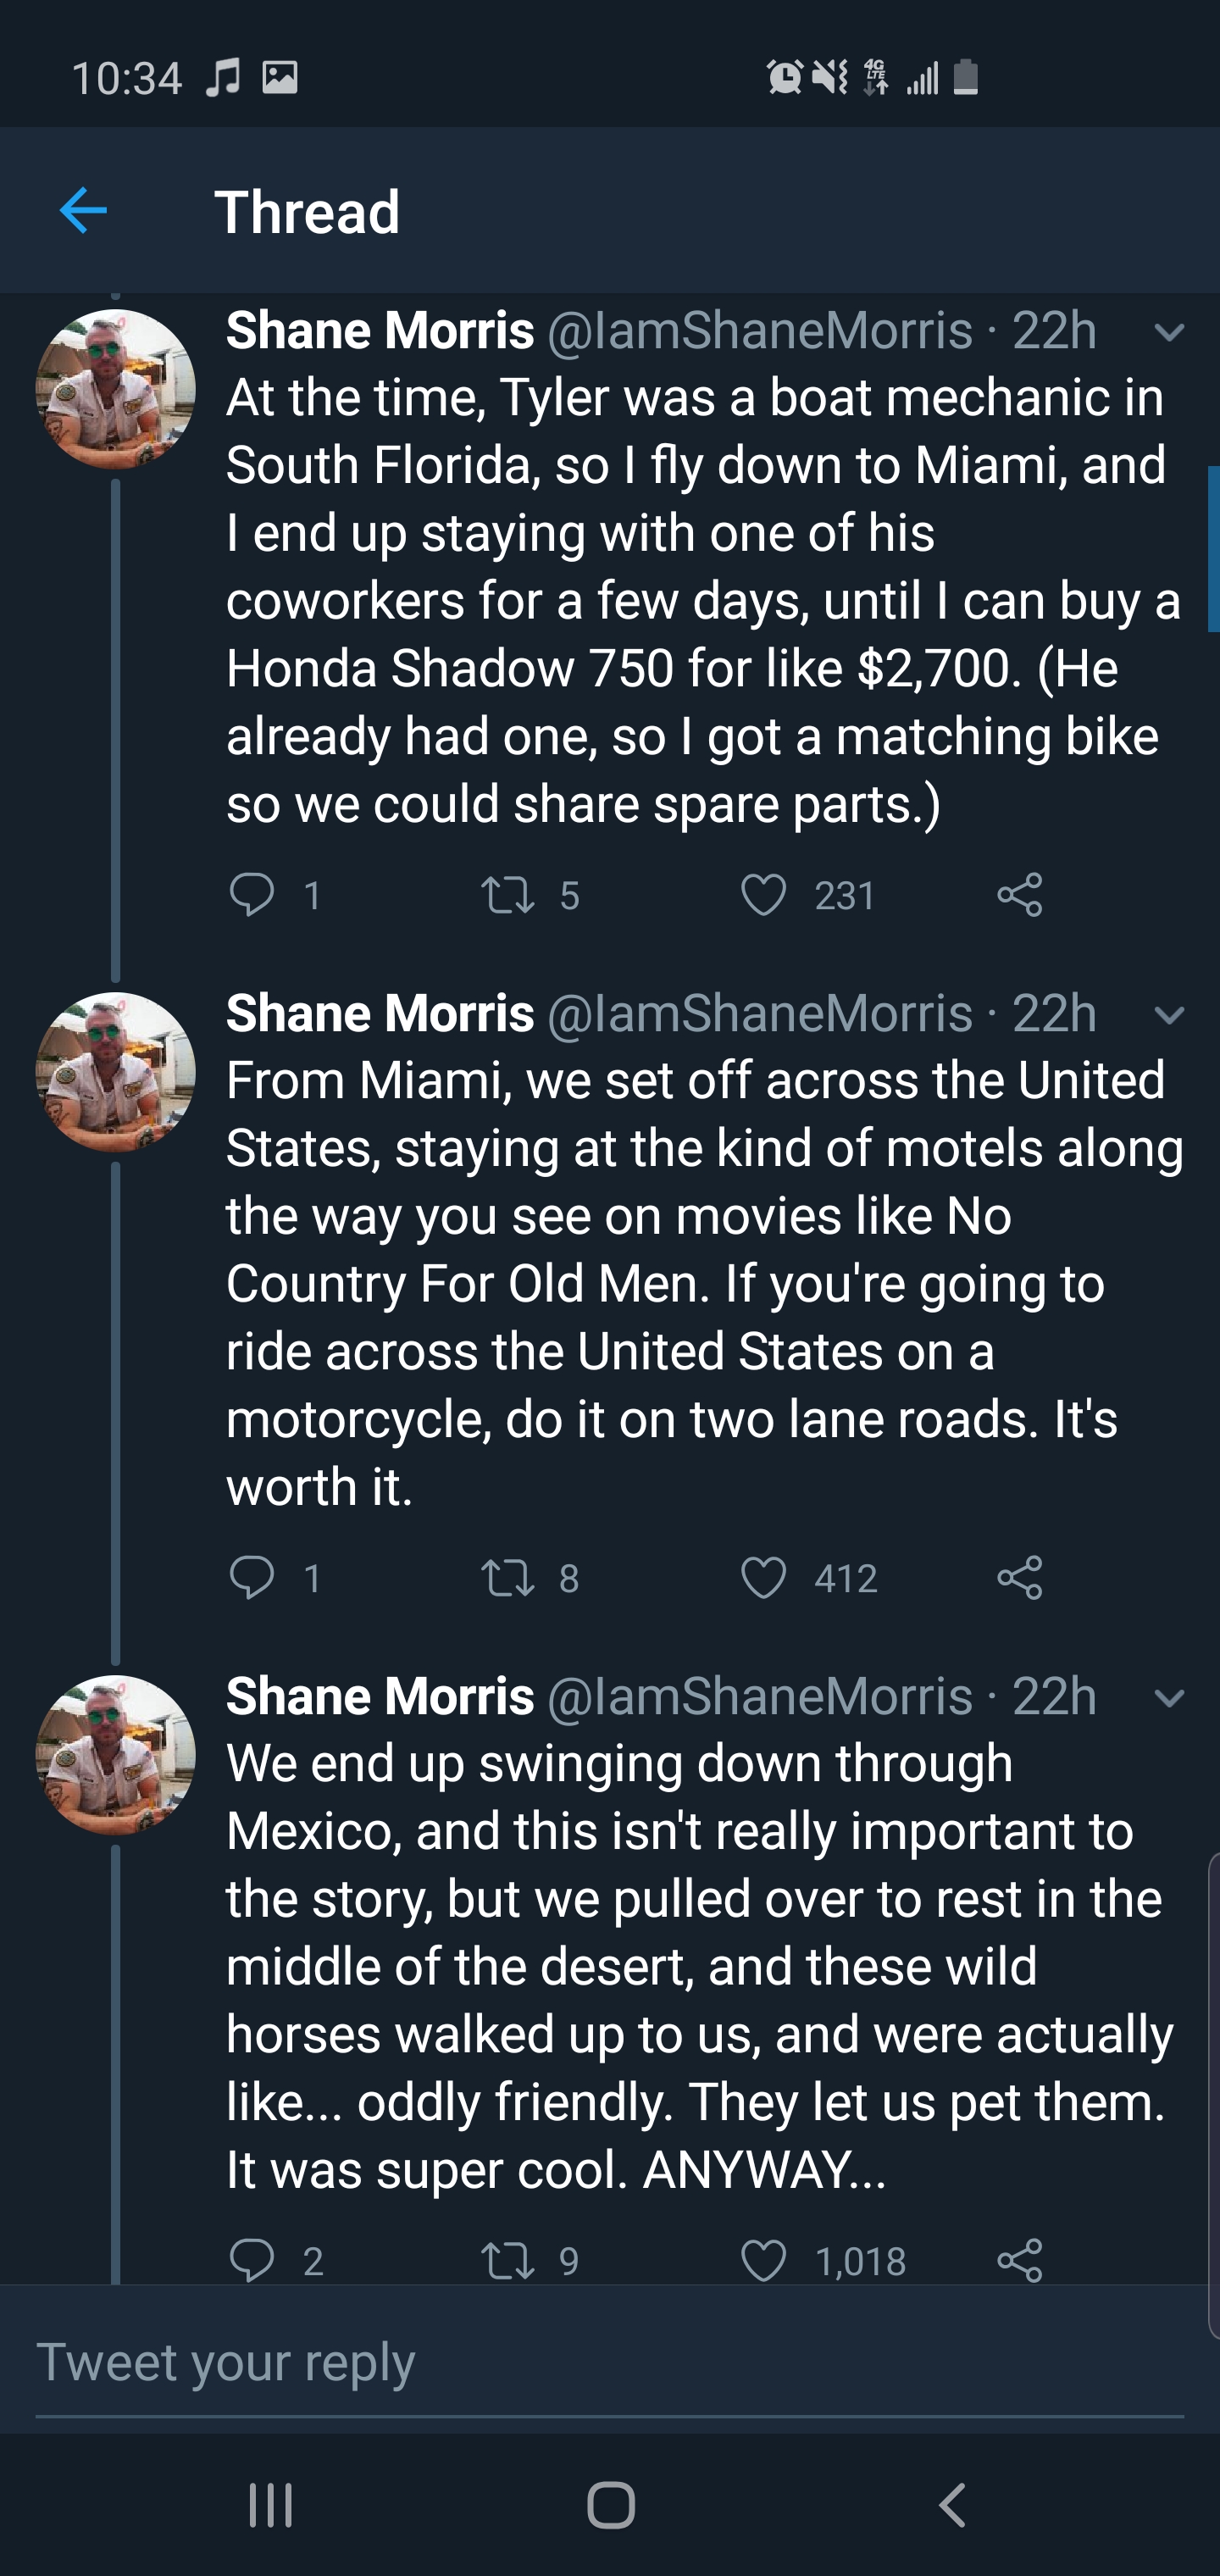 screenshot - 29 Sa Thread Shane Morris 22h At the time, Tyler was a boat mechanic in South Florida, so I fly down to Miami, and I end up staying with one of his coworkers for a few days, until I can buy a Honda Shadow 750 for $2,700. He already had one, s